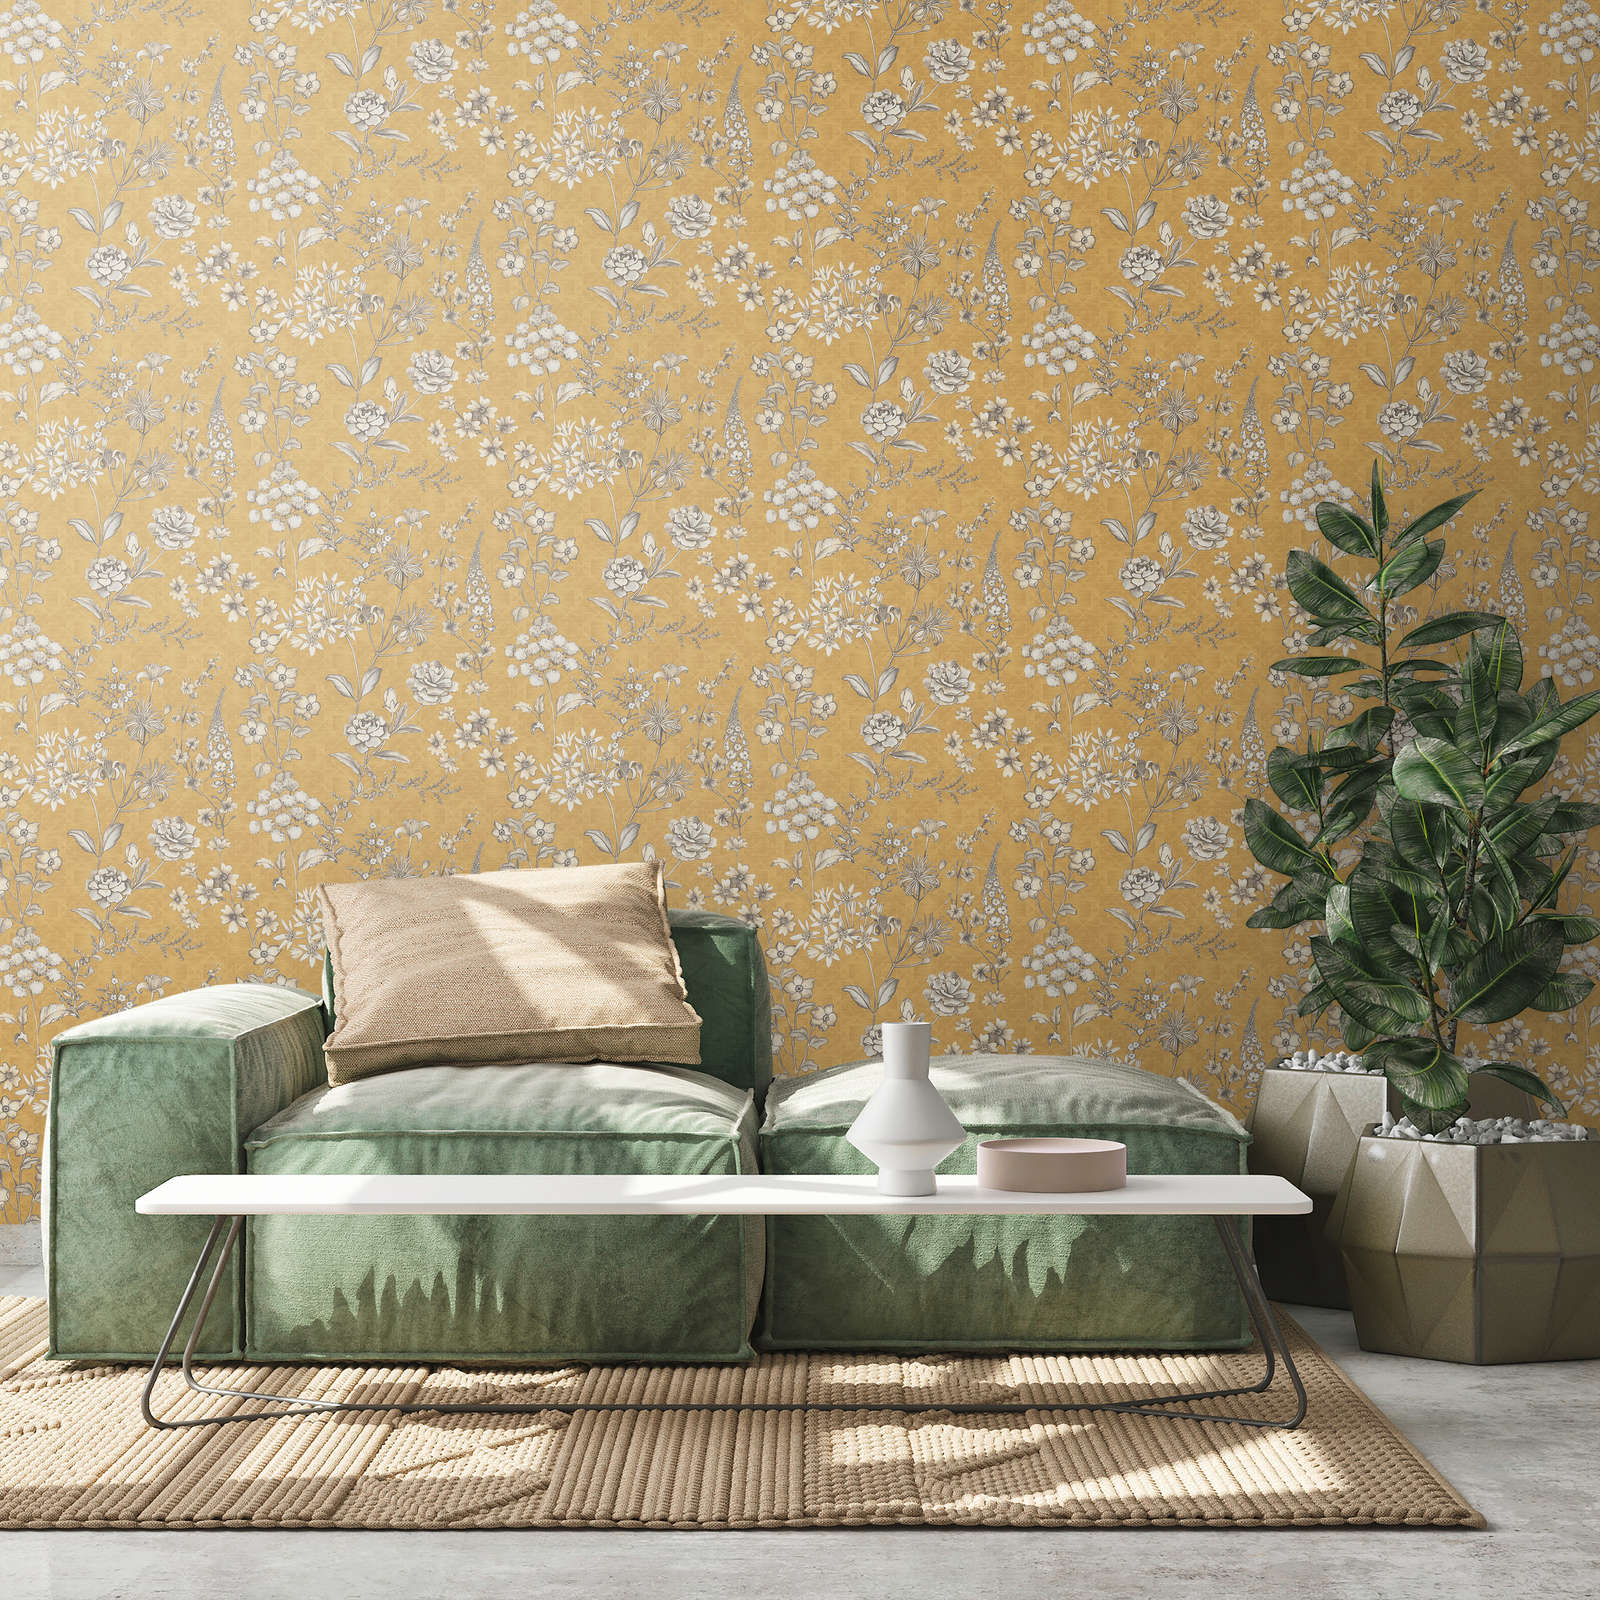             Vintage non-woven wallpaper with floral pattern - yellow, white, grey
        